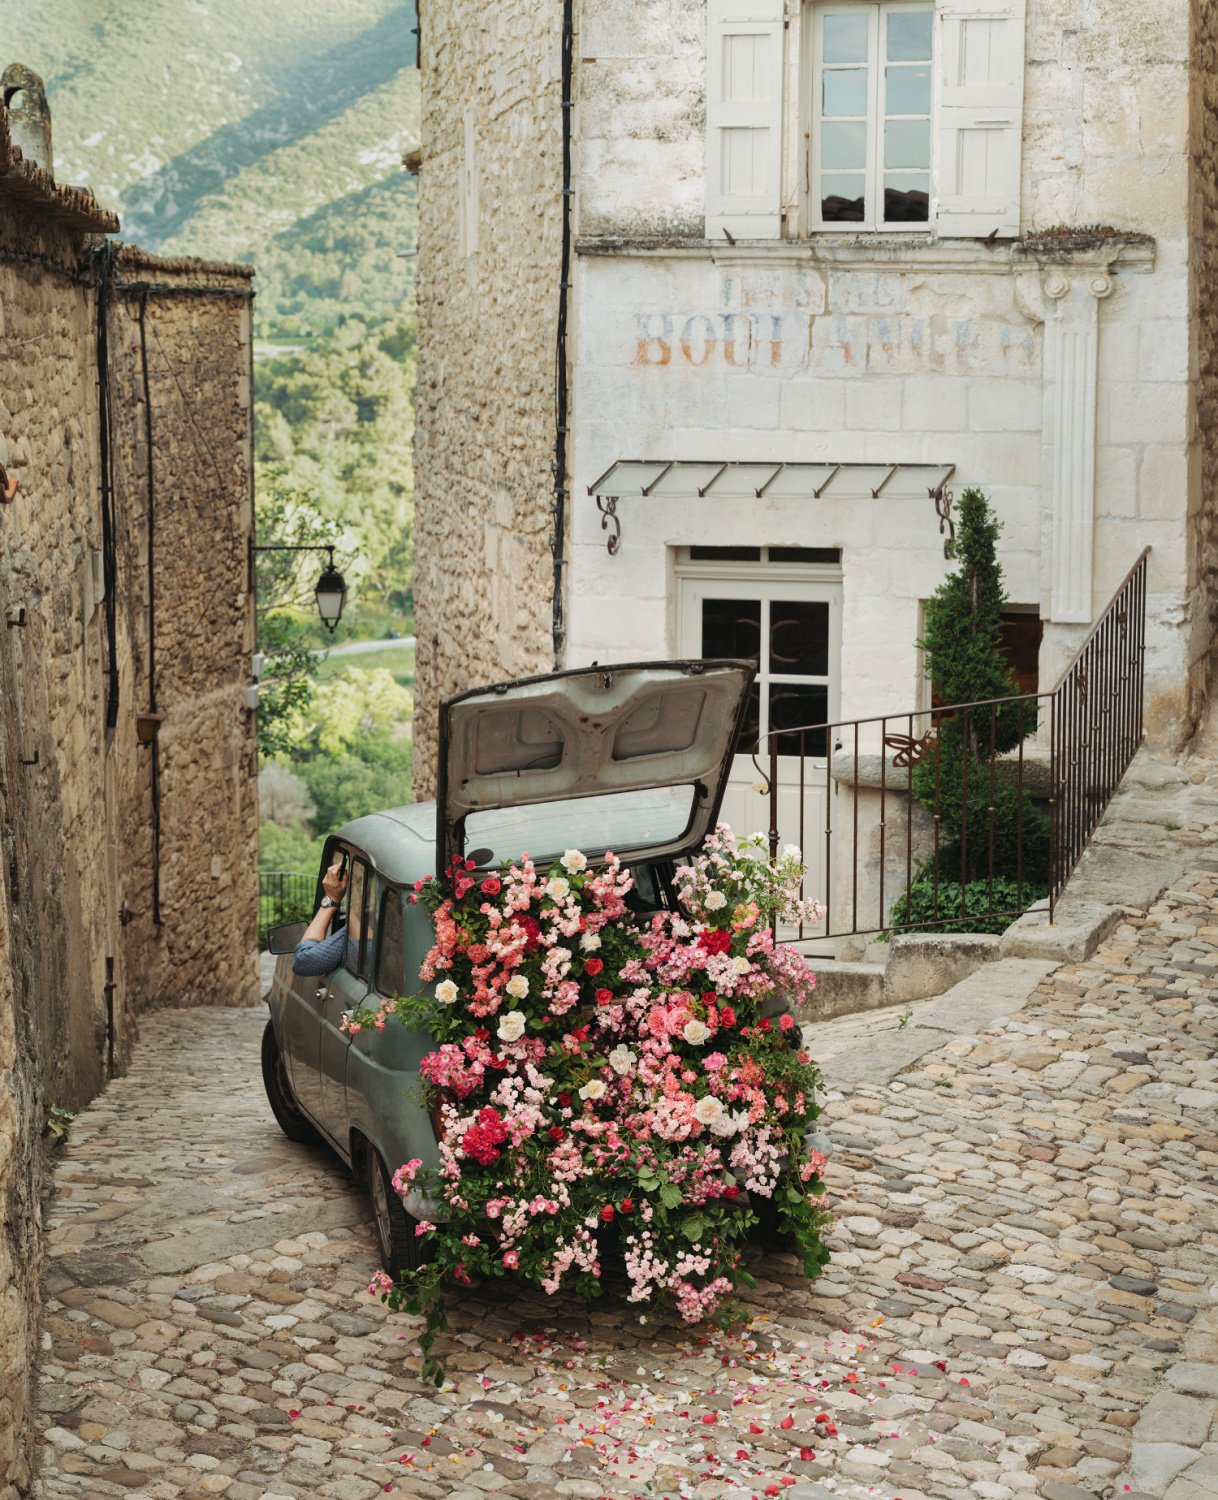 A romantic glimpse from Provence in THE FLOWERS OF PROVENCE by Jamie Beck. #provencestyle #flowersofprovence #jamiebeck